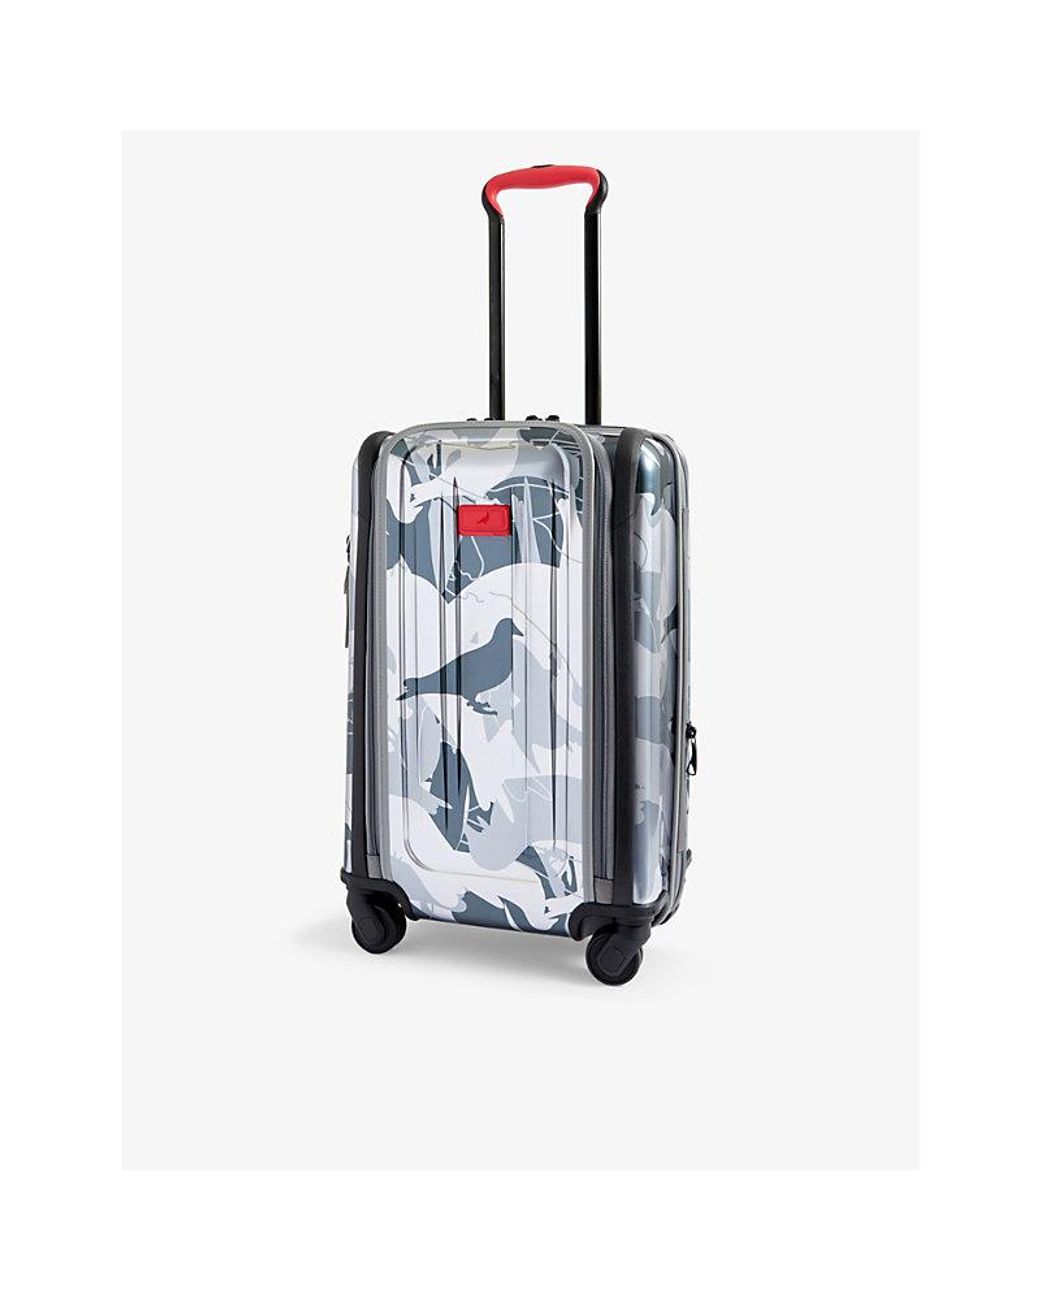 Tumi International Expandable Carry-on Four-wheeled Suitcase in Metallic |  Lyst